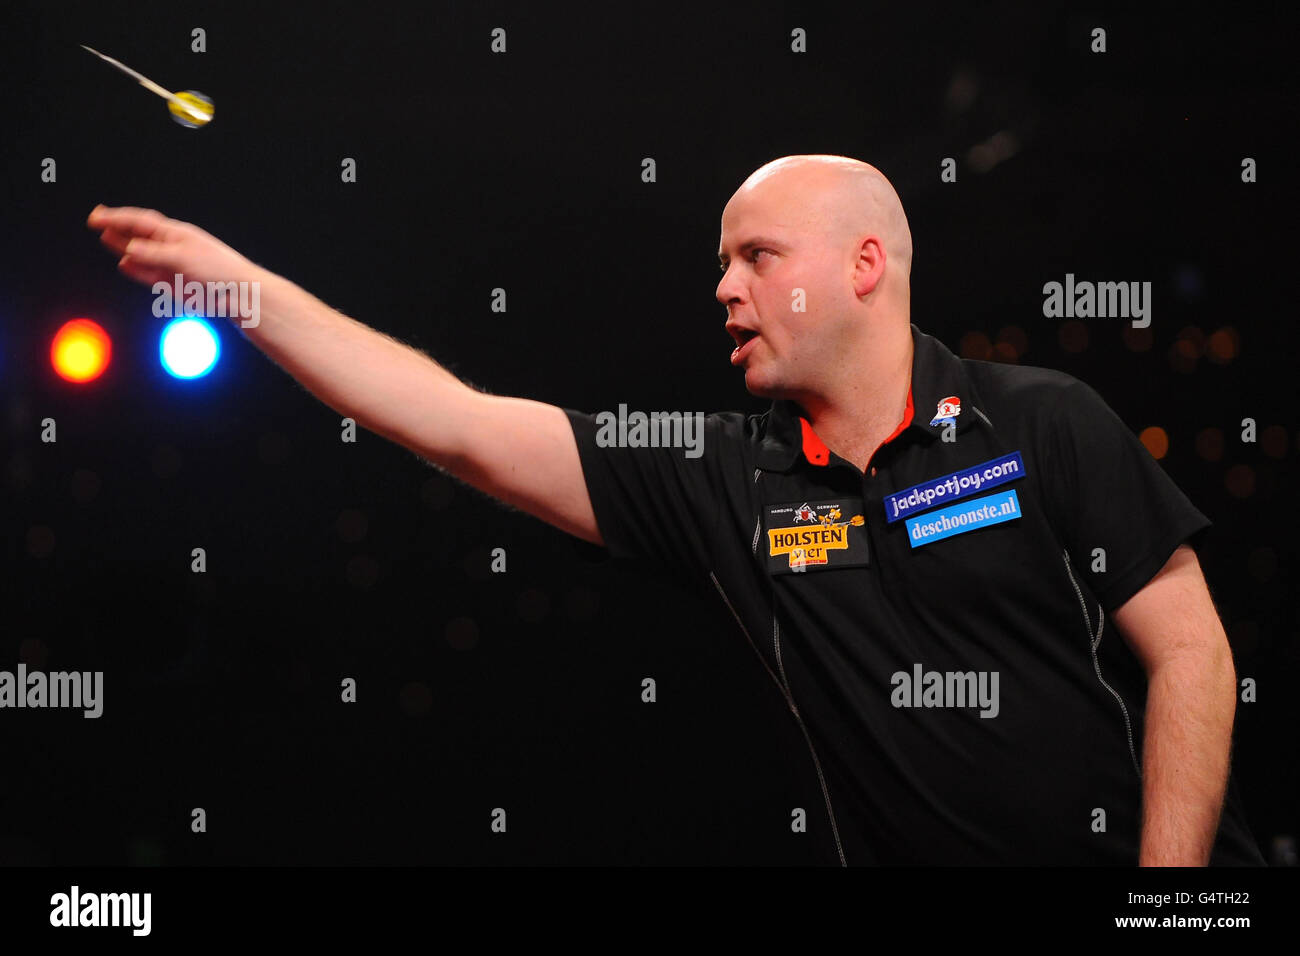 Darts Frimley Green 204768. Netherland's Christian Kist in the final of the Lakeside World Professional Darts Championship Stock Photo